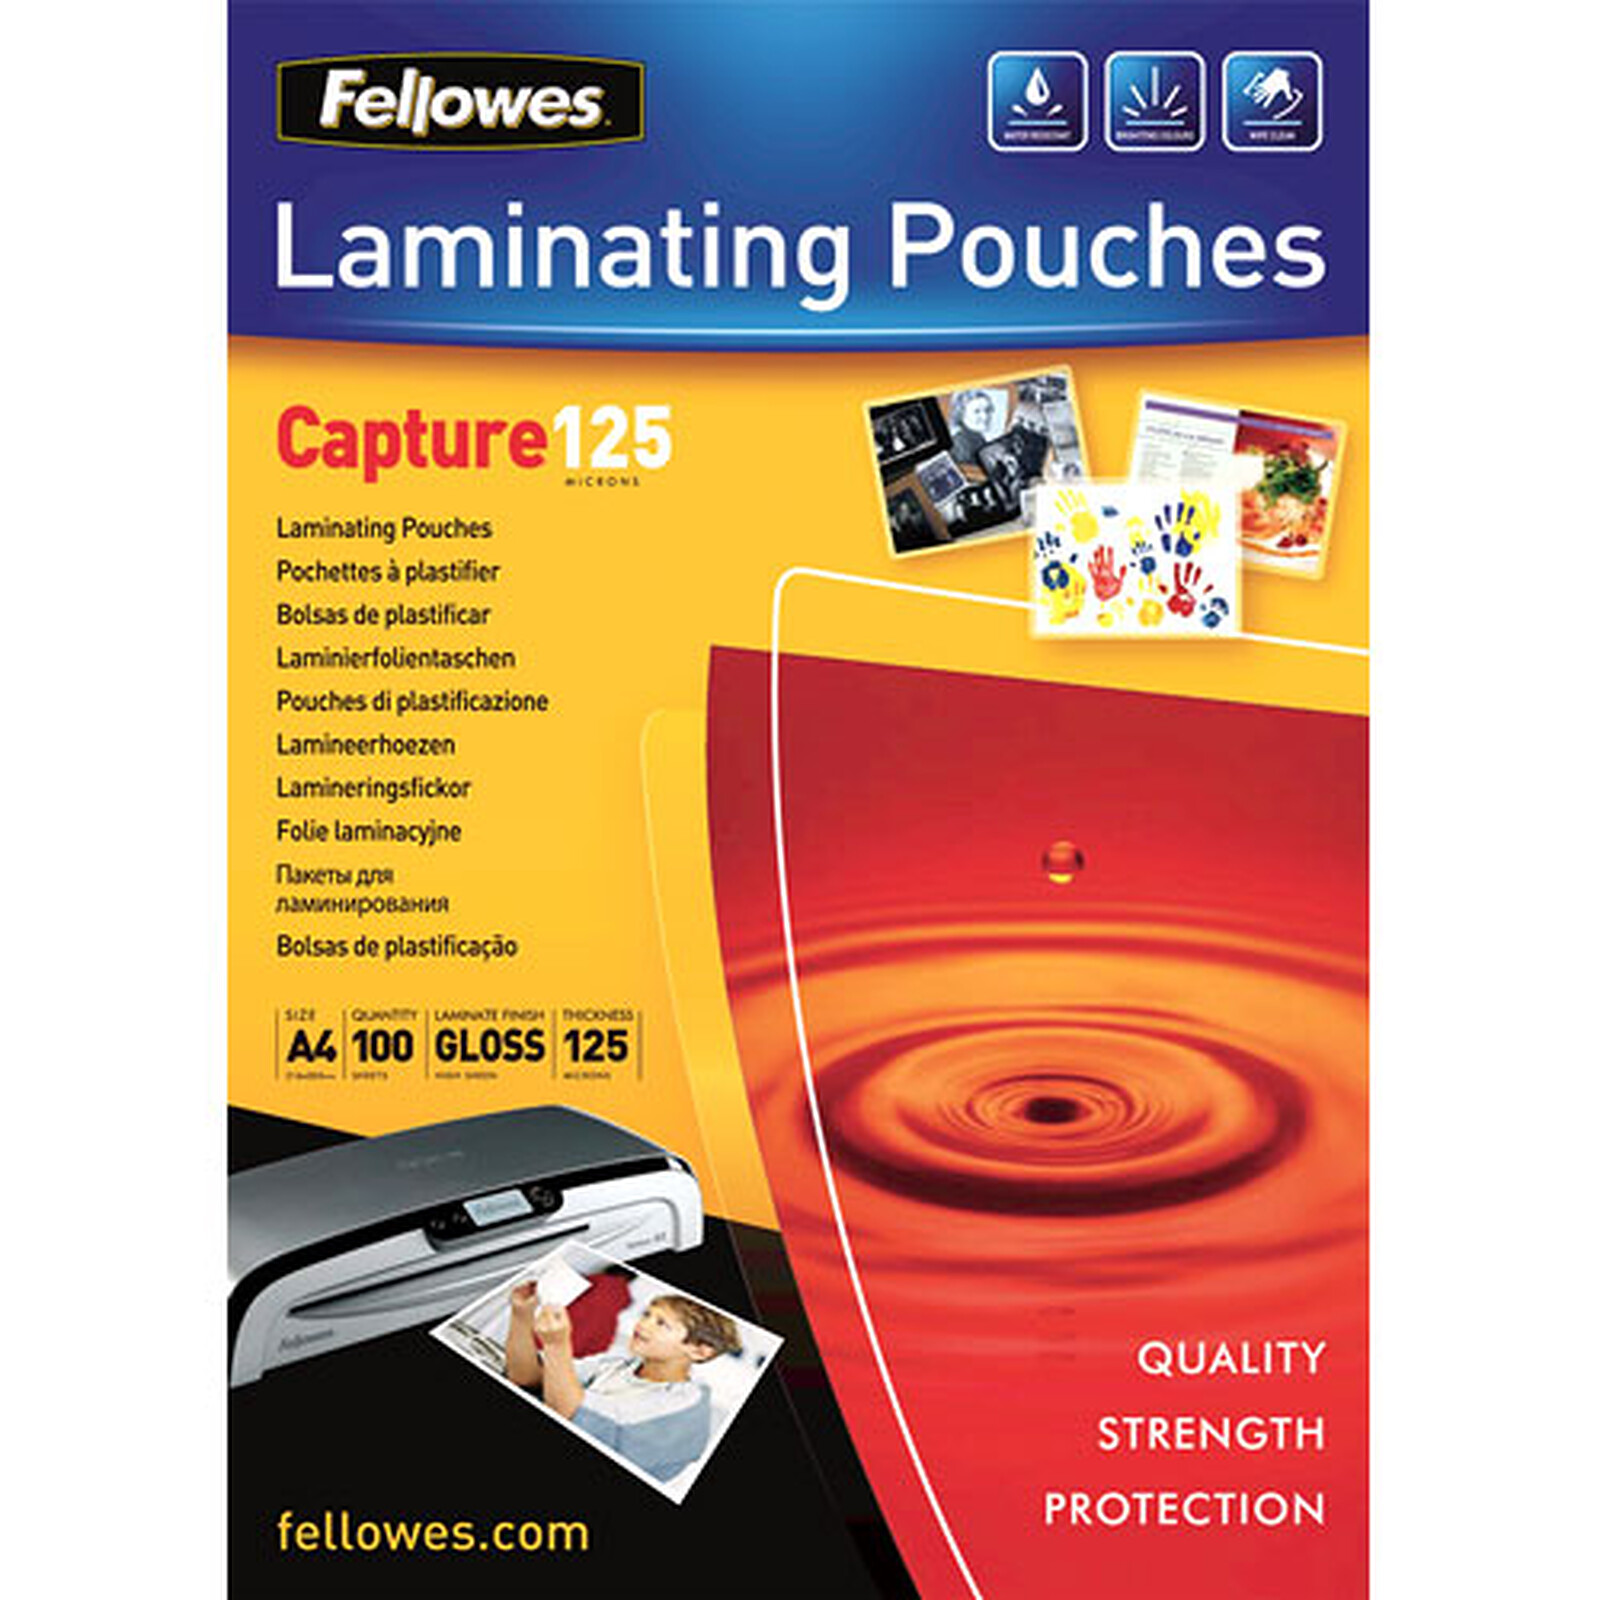 Fellowes A75 A4 Laminator Maximum pouch thickness 125 microns GREY 